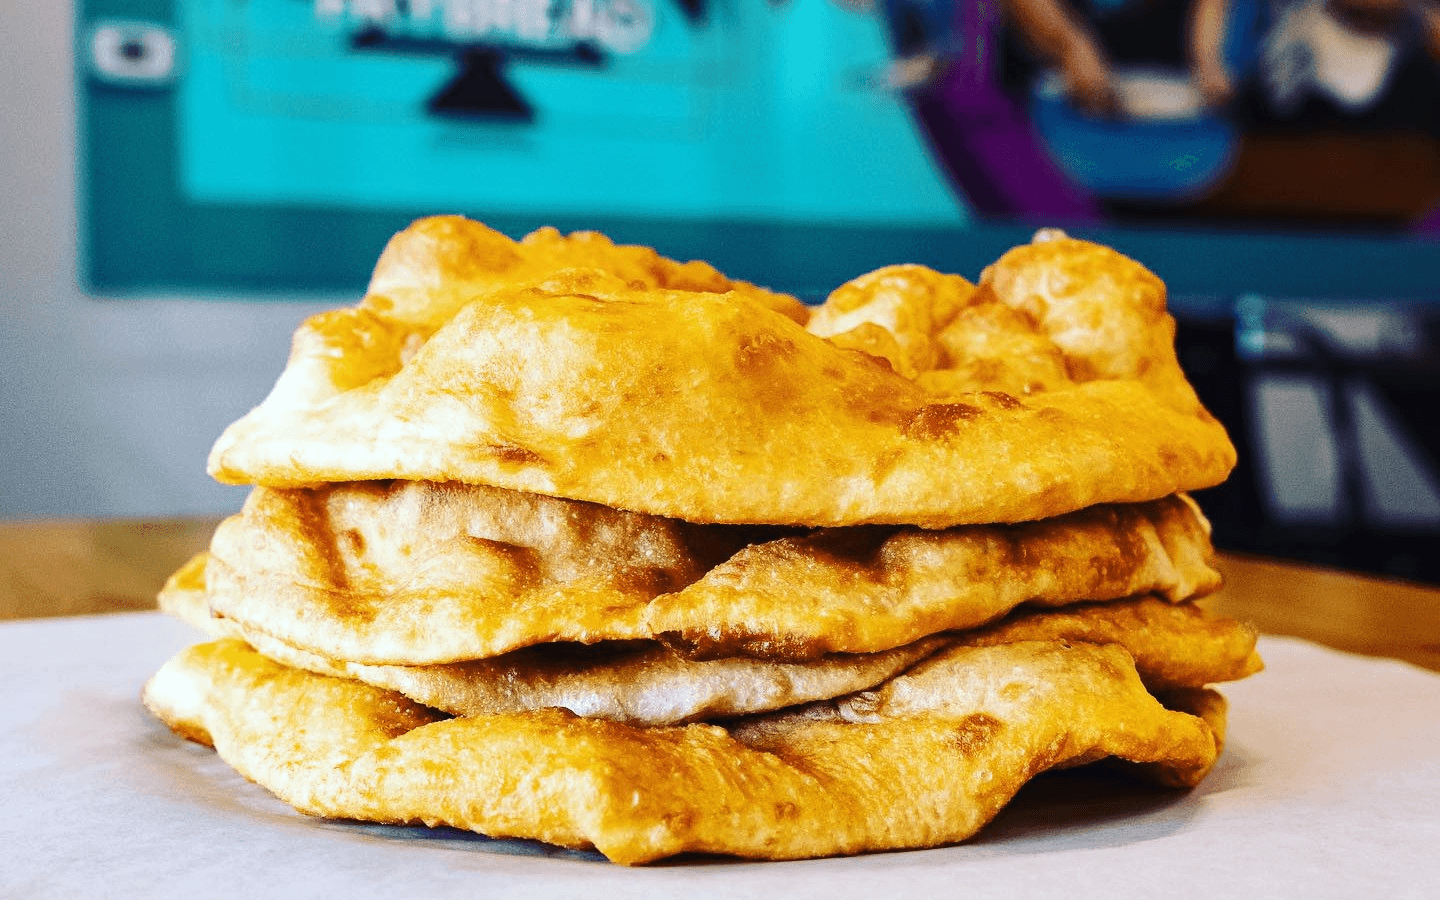 What's on the menu at Hope's Frybread